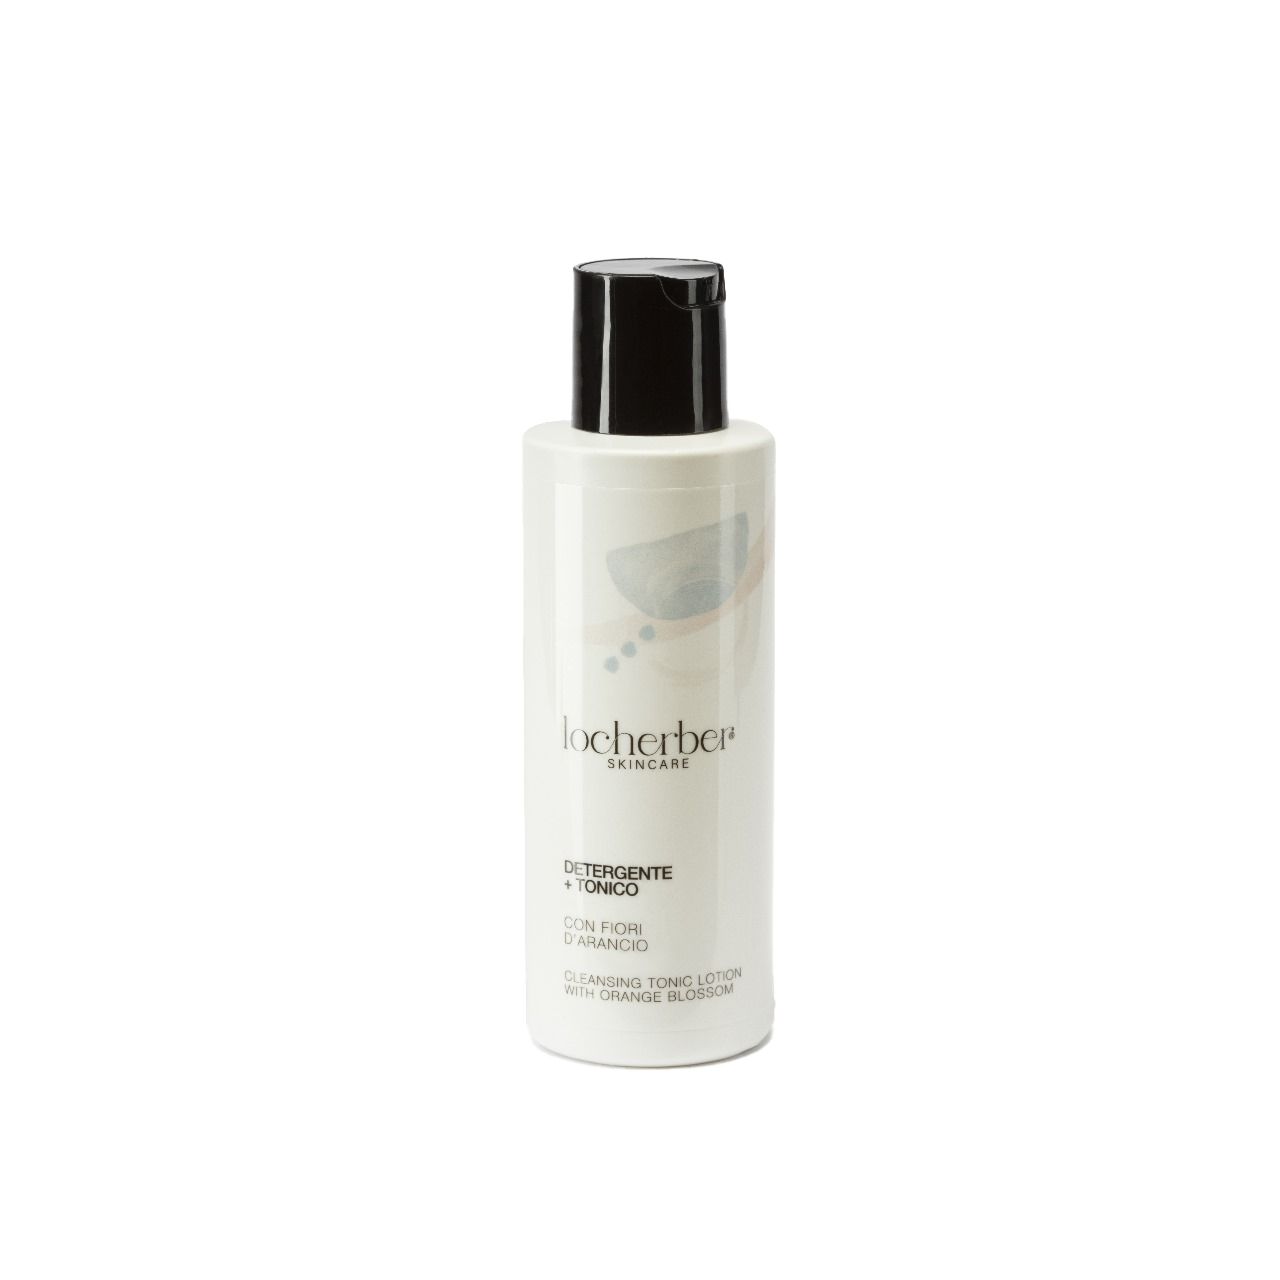 Cleansing Tonic Lotion 150 ml